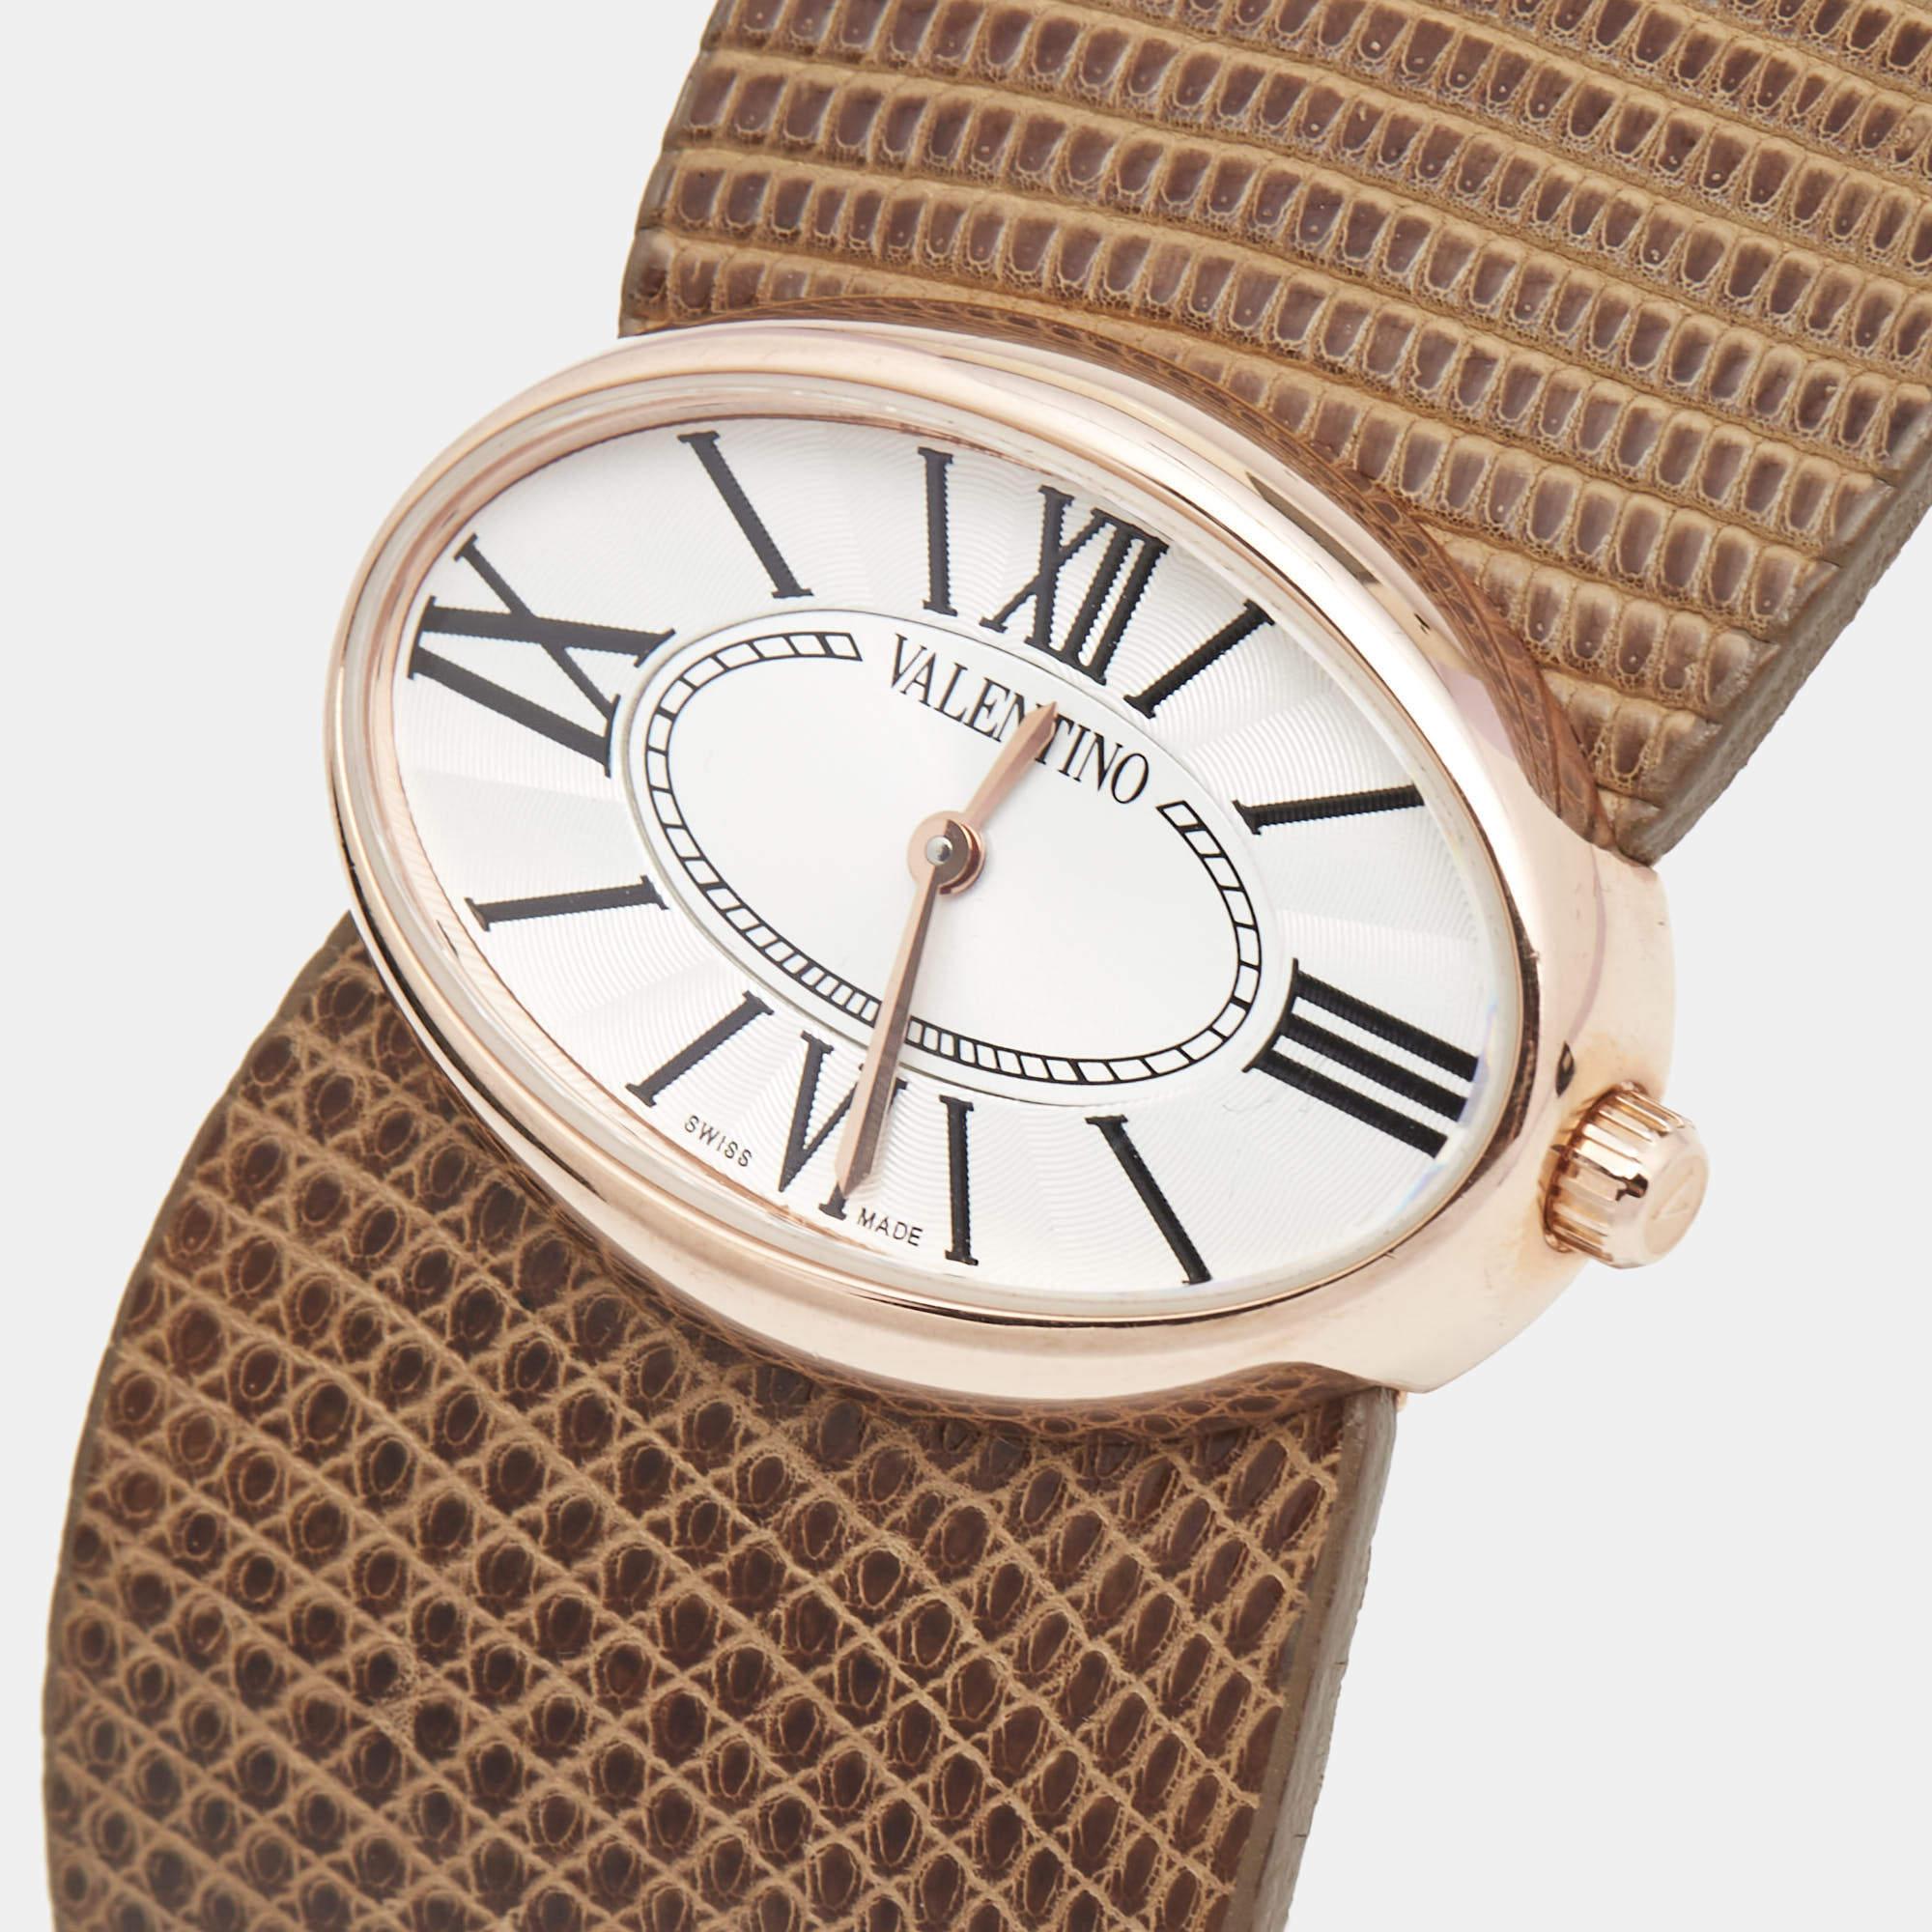 Contemporary Valentino Gold Plated Stainless Lizard Leather Seduction Women's Wristwatch 36mm